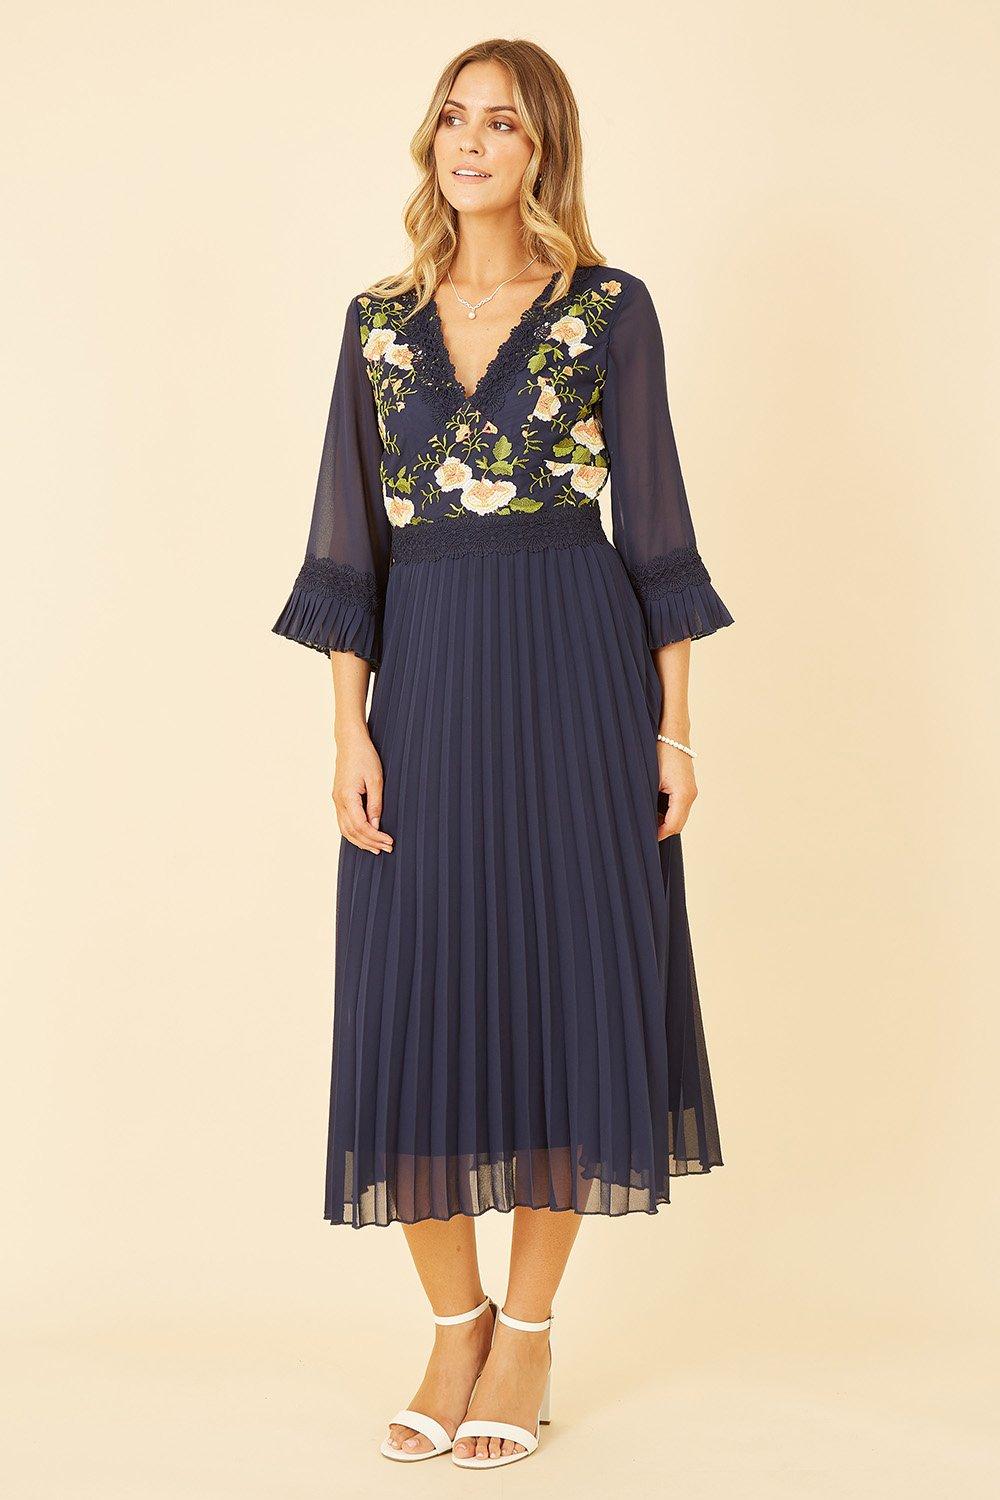 Navy Embroidered Floral Pleated Midi Dress